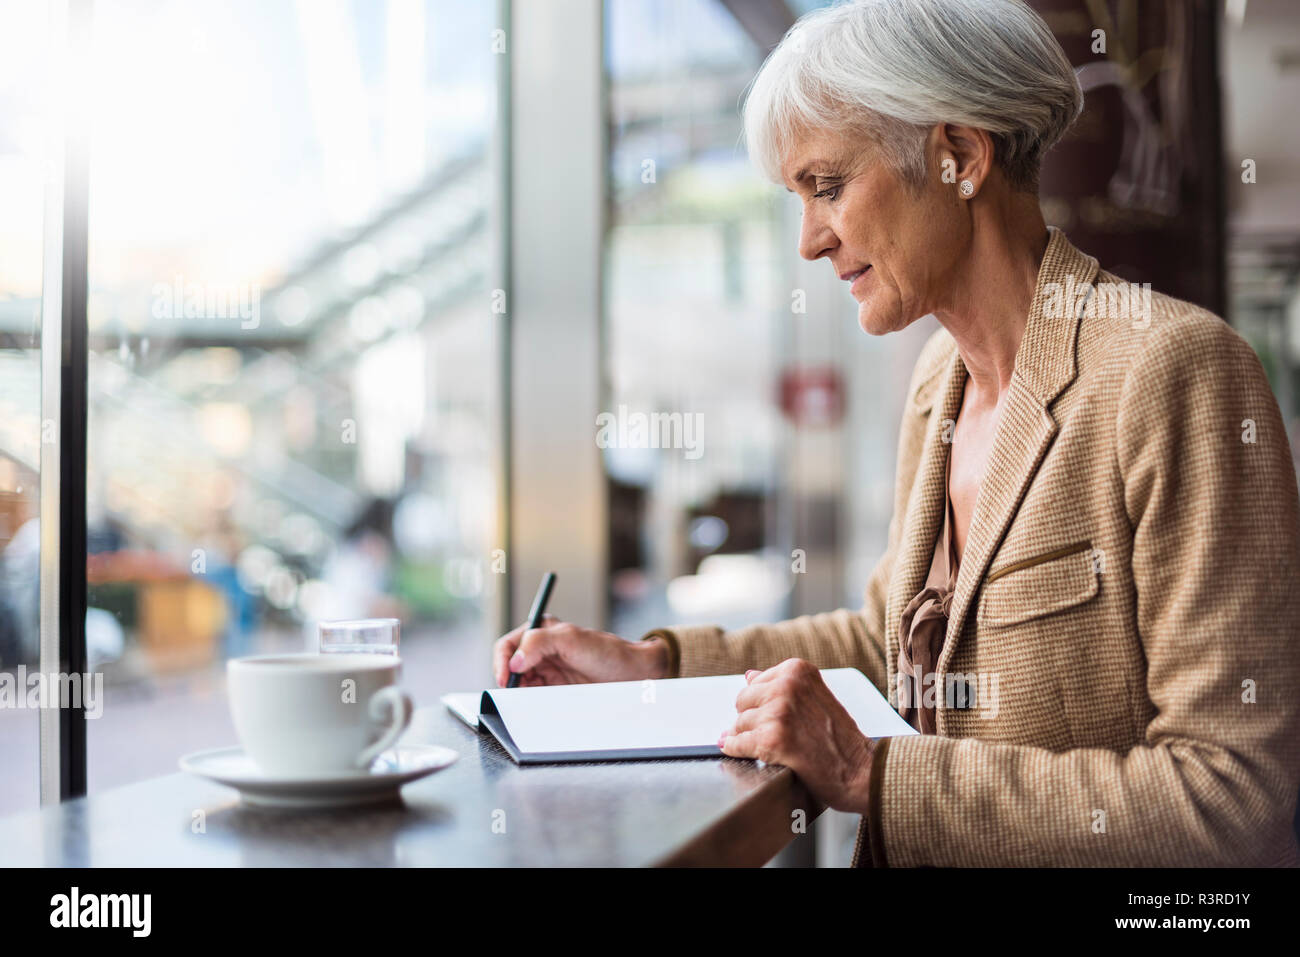 Senior businesswoman taking notes in a cafe Stock Photo